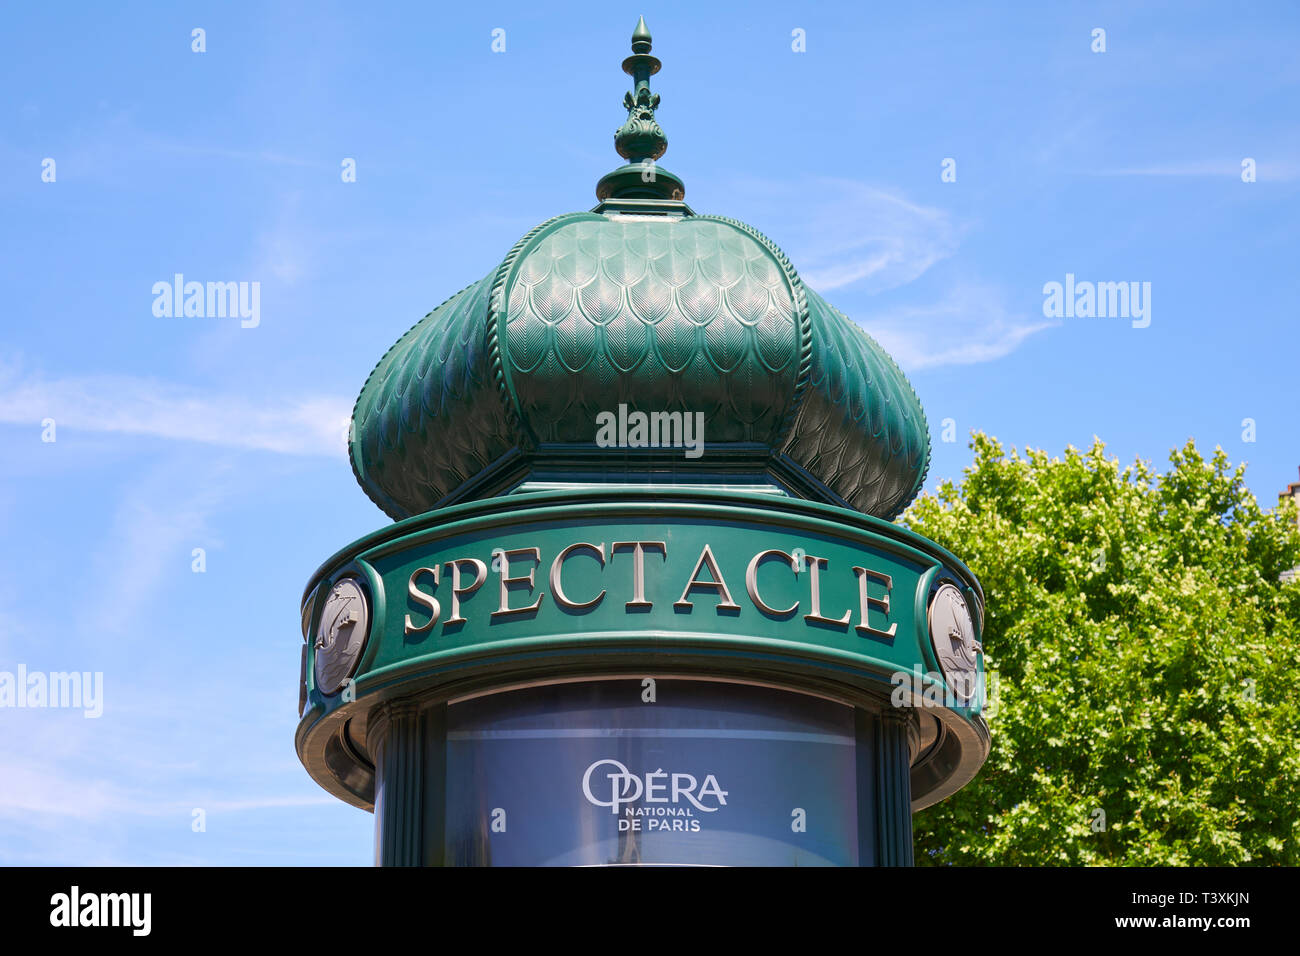 PARIS, FRANCE - JULY 21, 2017: Typical green advertising column or Morris column in Paris in a sunny summer day, blue sky in France Stock Photo